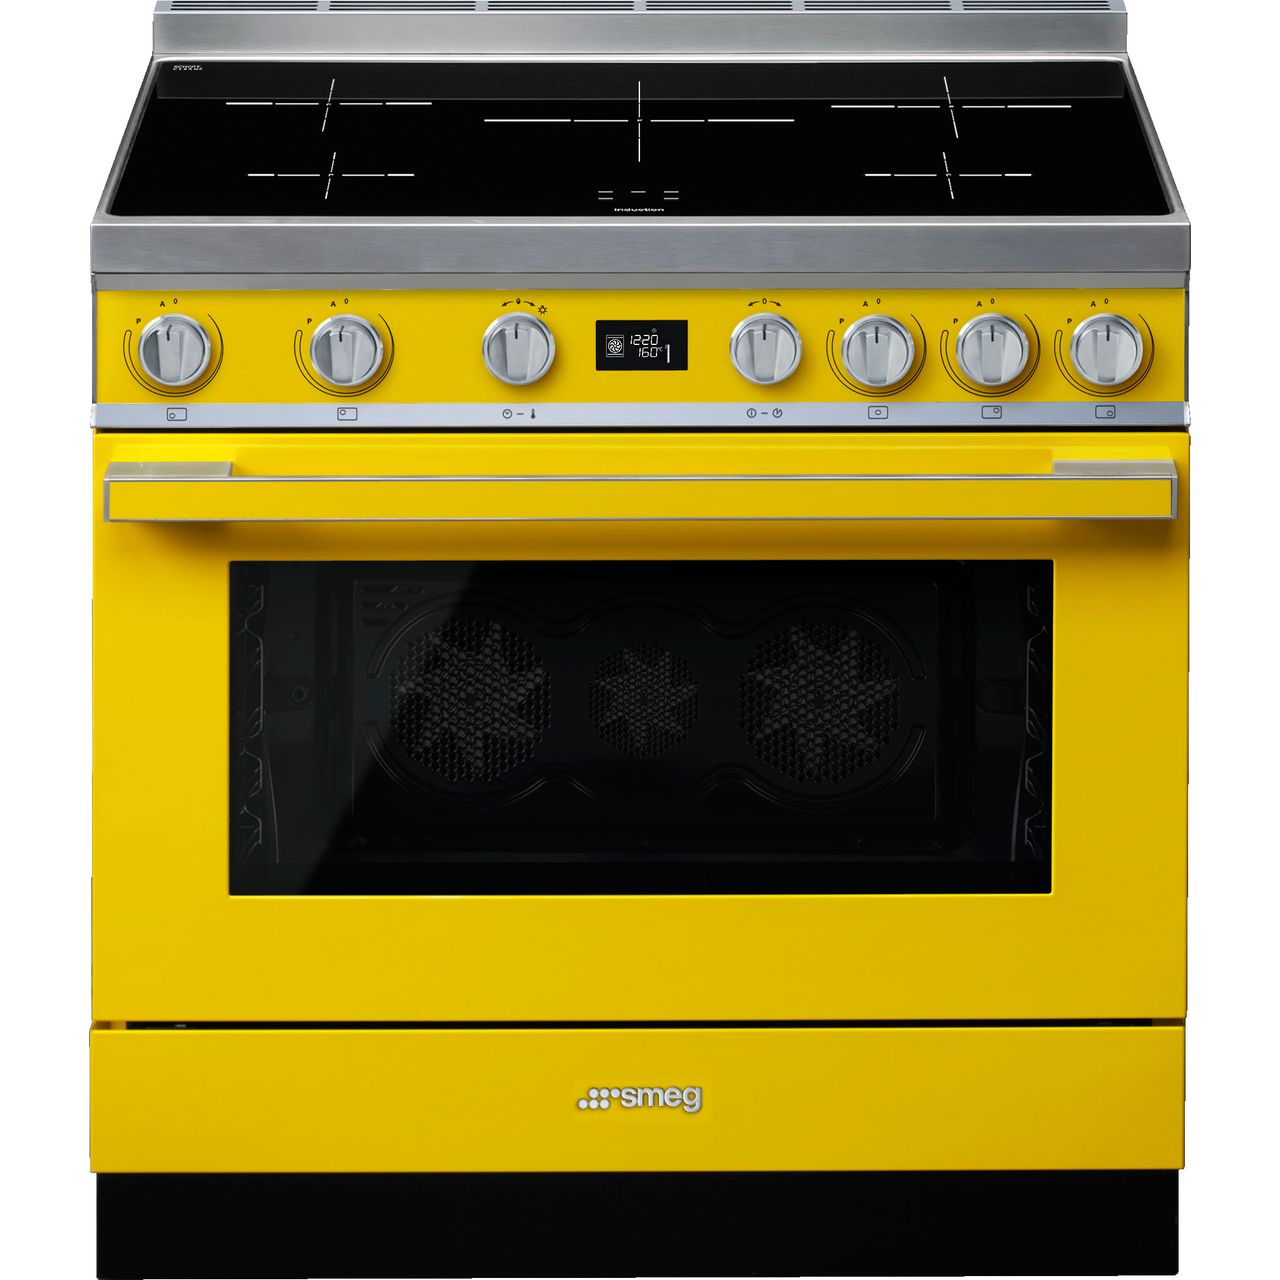 Smeg Portofino CPF9iPYW 90cm Electric Range Cooker with Induction Hob Review